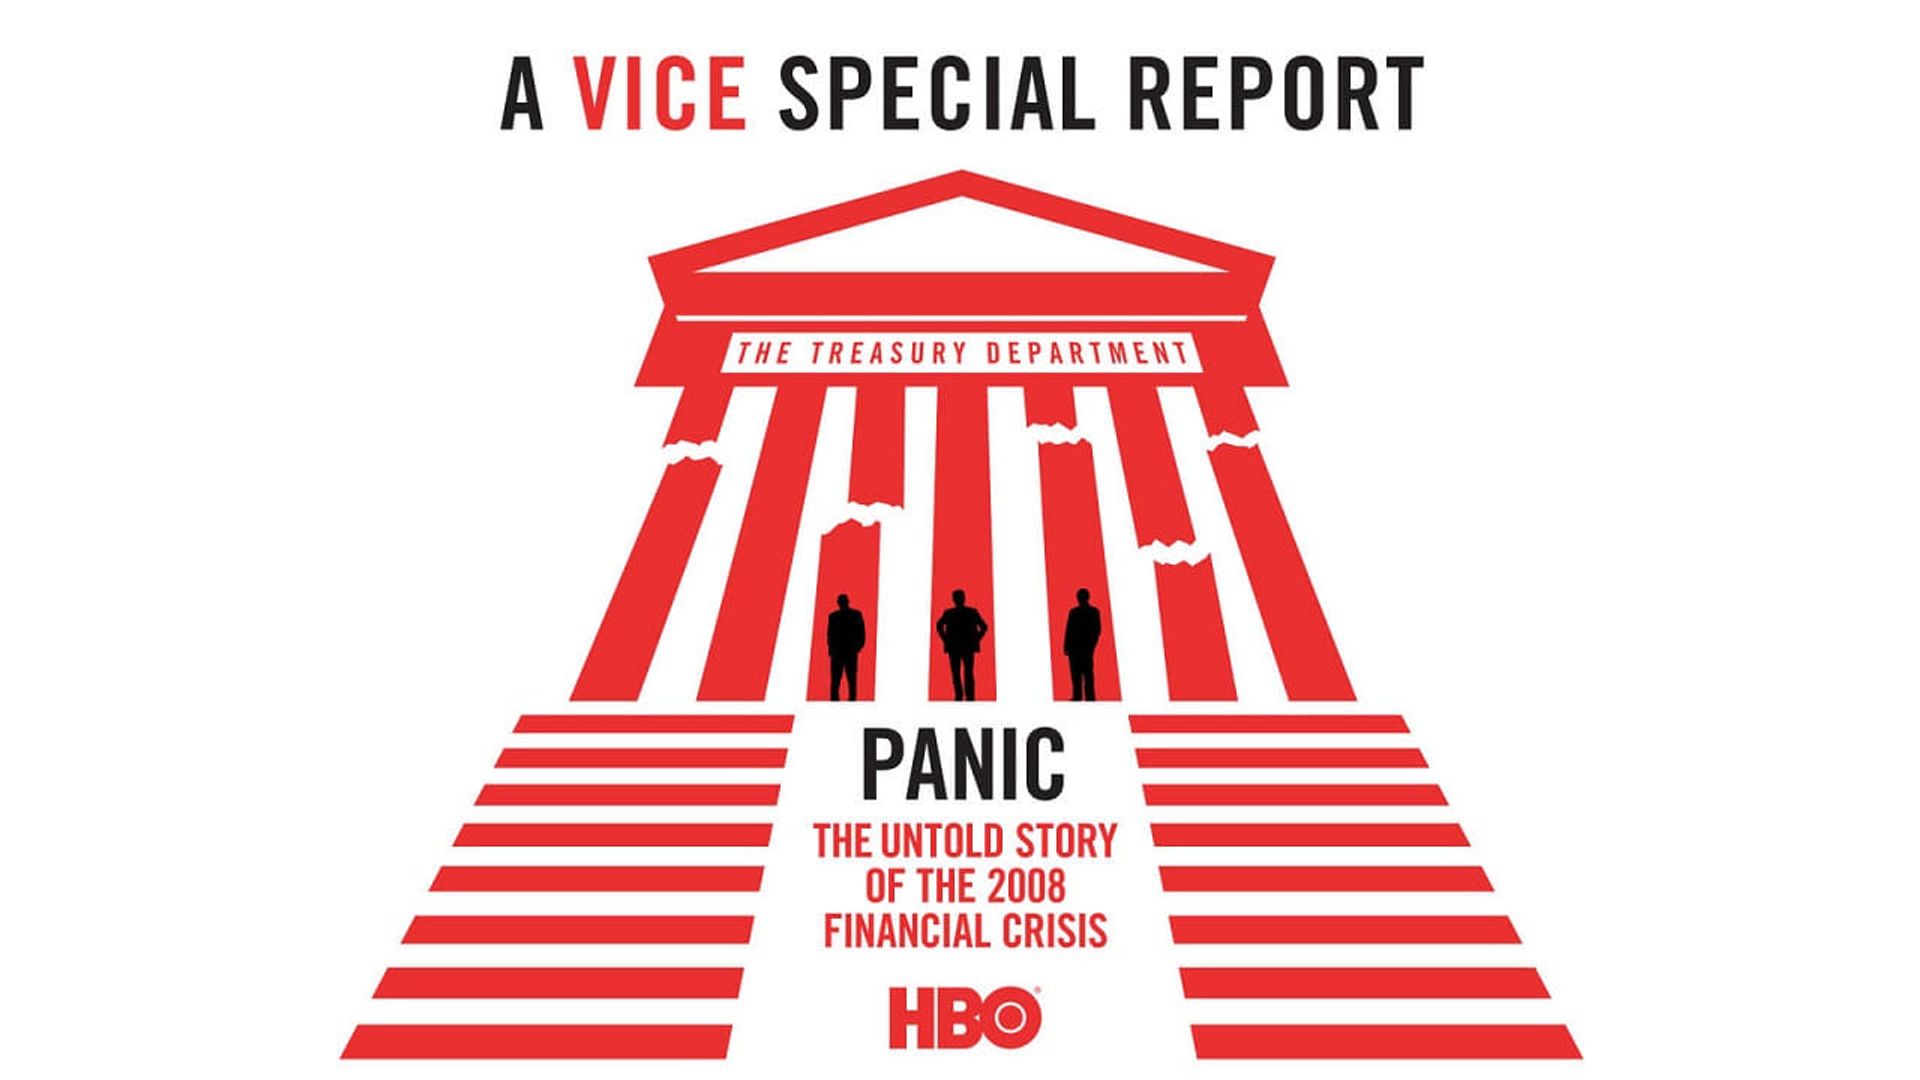 Panic: The Untold Story of the 2008 Financial Crisis background